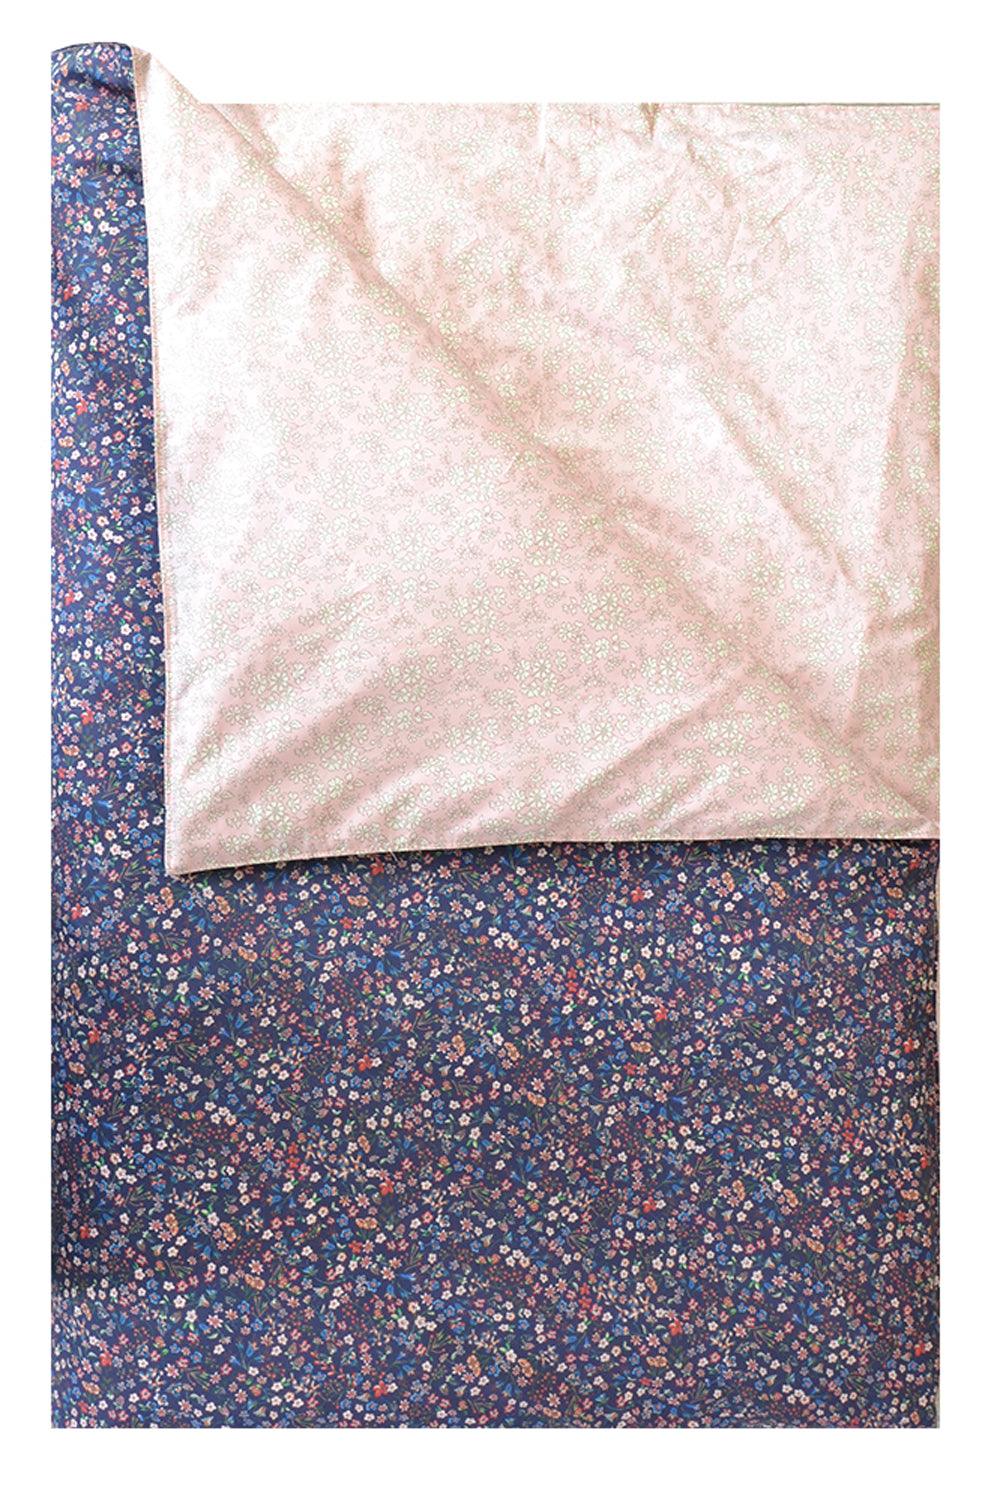 Bedding made with Liberty Fabric DONNA LEIGH PURPLE & CAPEL PINK - Coco & Wolf